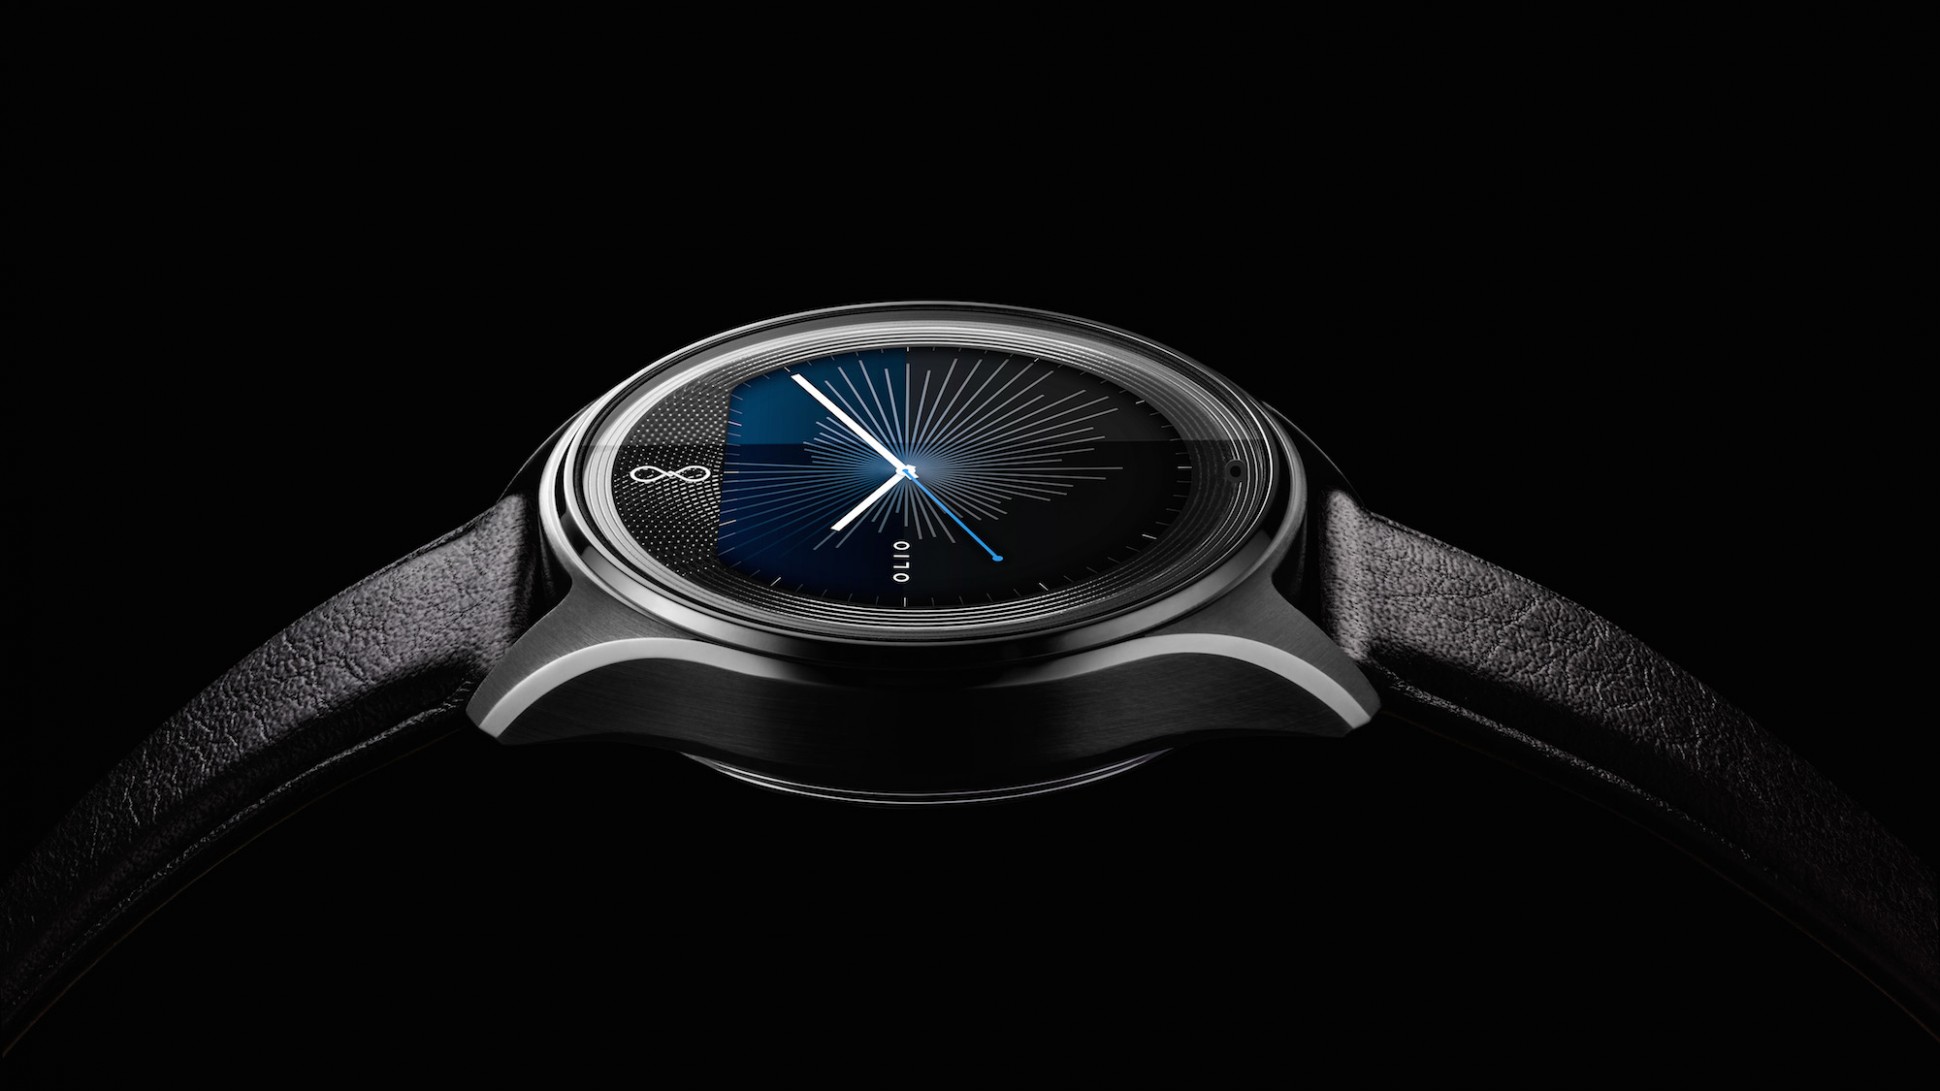 Olio Enters "High-End" Smartwatch Race